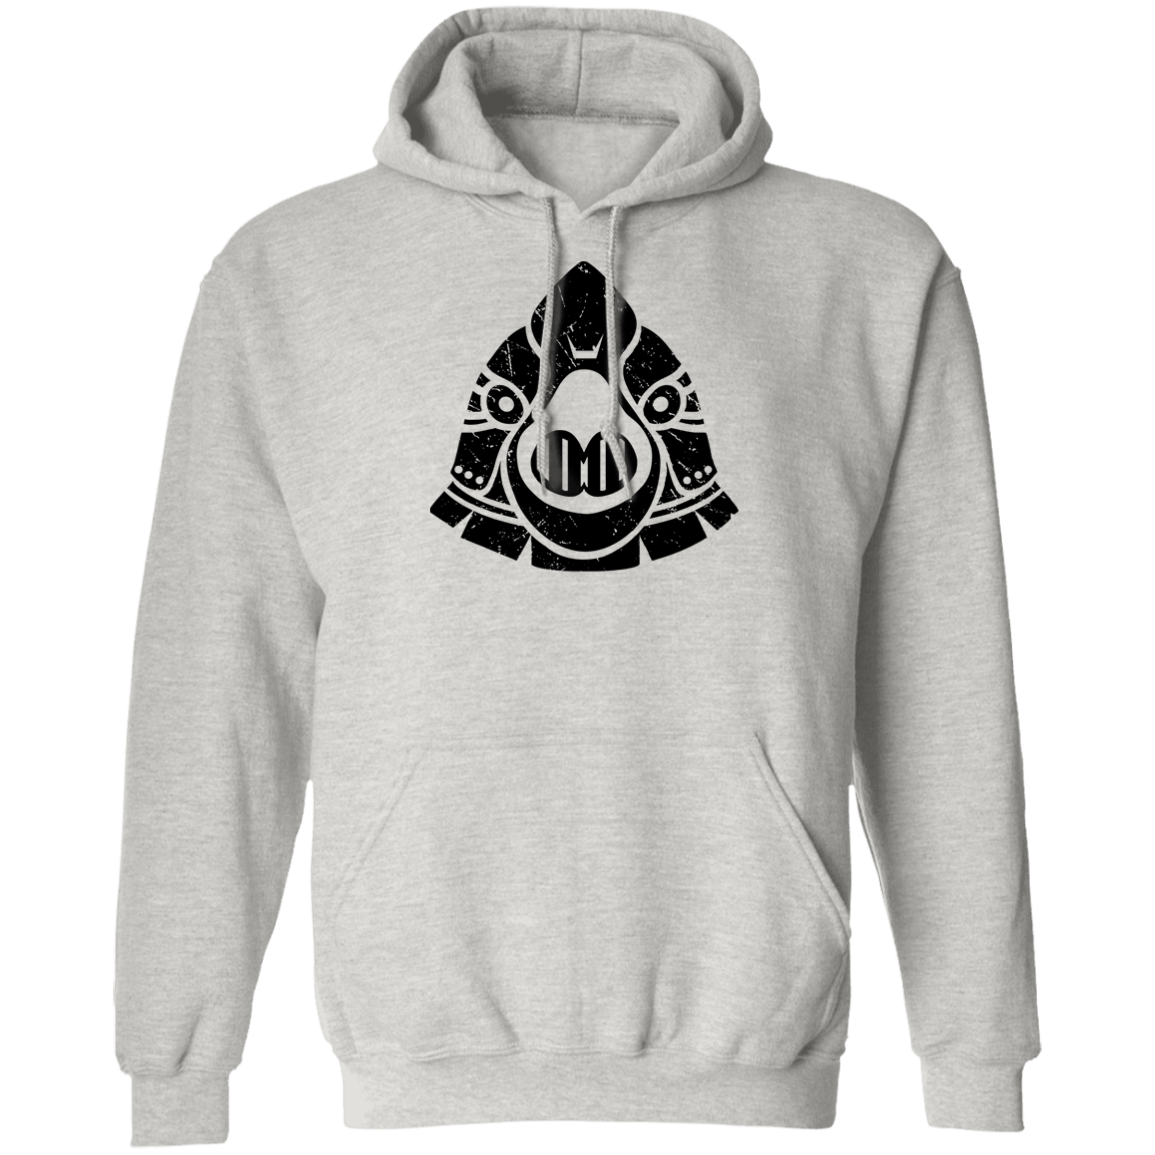 Black Distressed Emblem Hoodies for Adults (Chicken/Cluck)